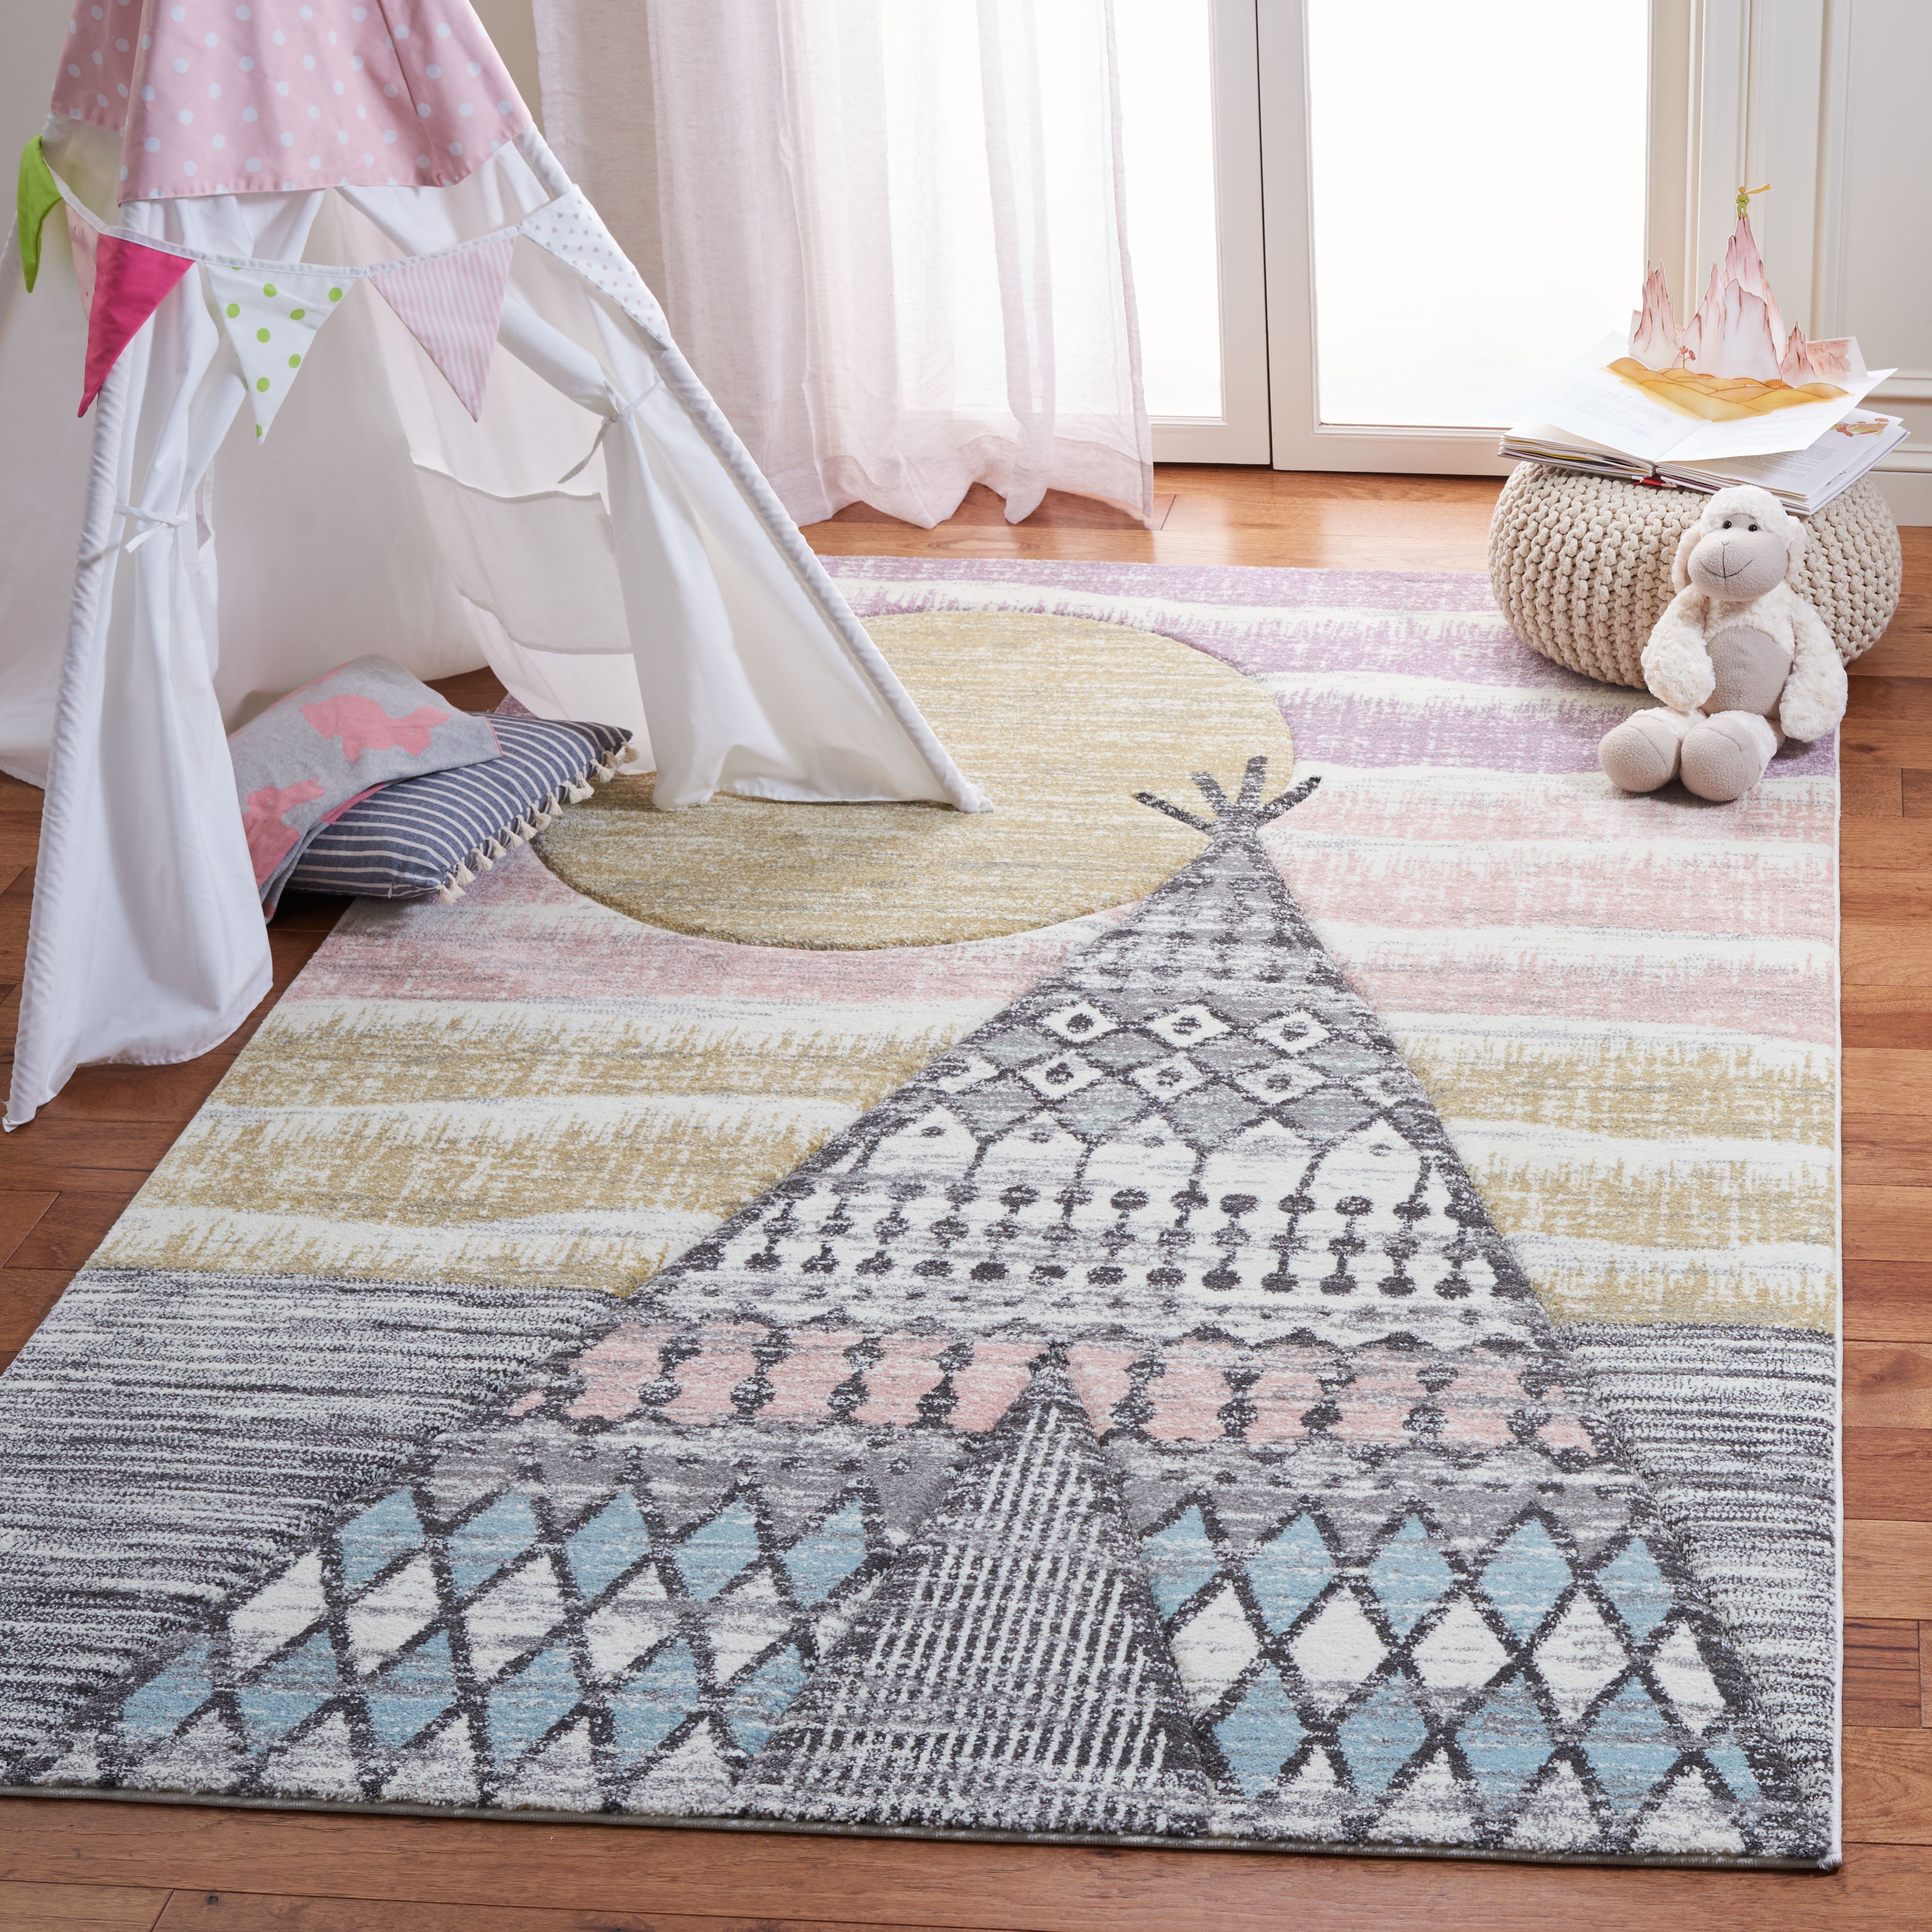 Kids Round Rug Polyester Throw Area Rug Soft Educational Washable Carpet Nursery Teepee Tent Play Mat Blooming Flowers